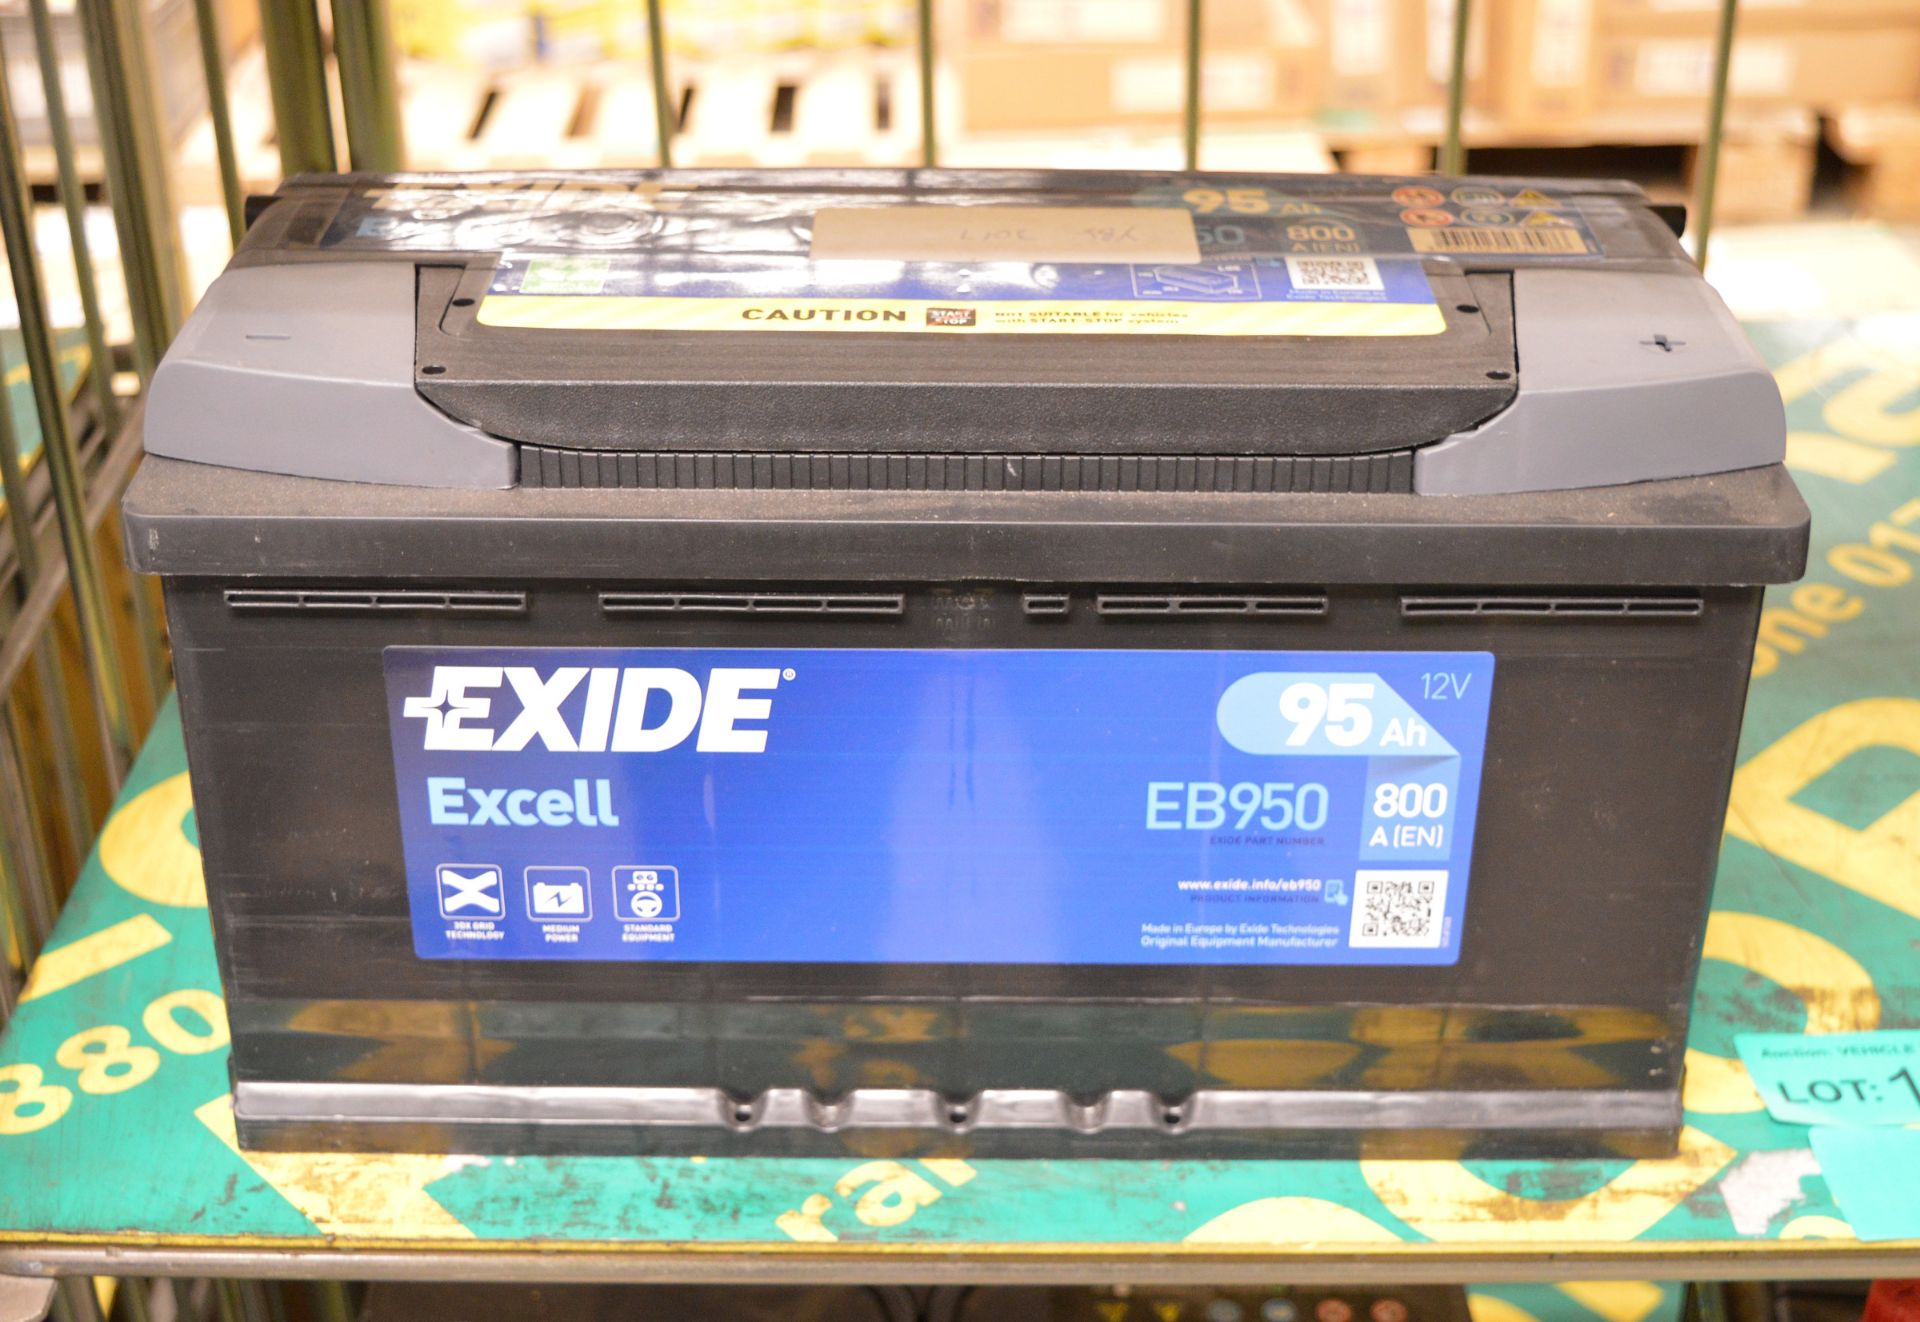 2x Exide Excell EB950 Batteries - Image 2 of 3